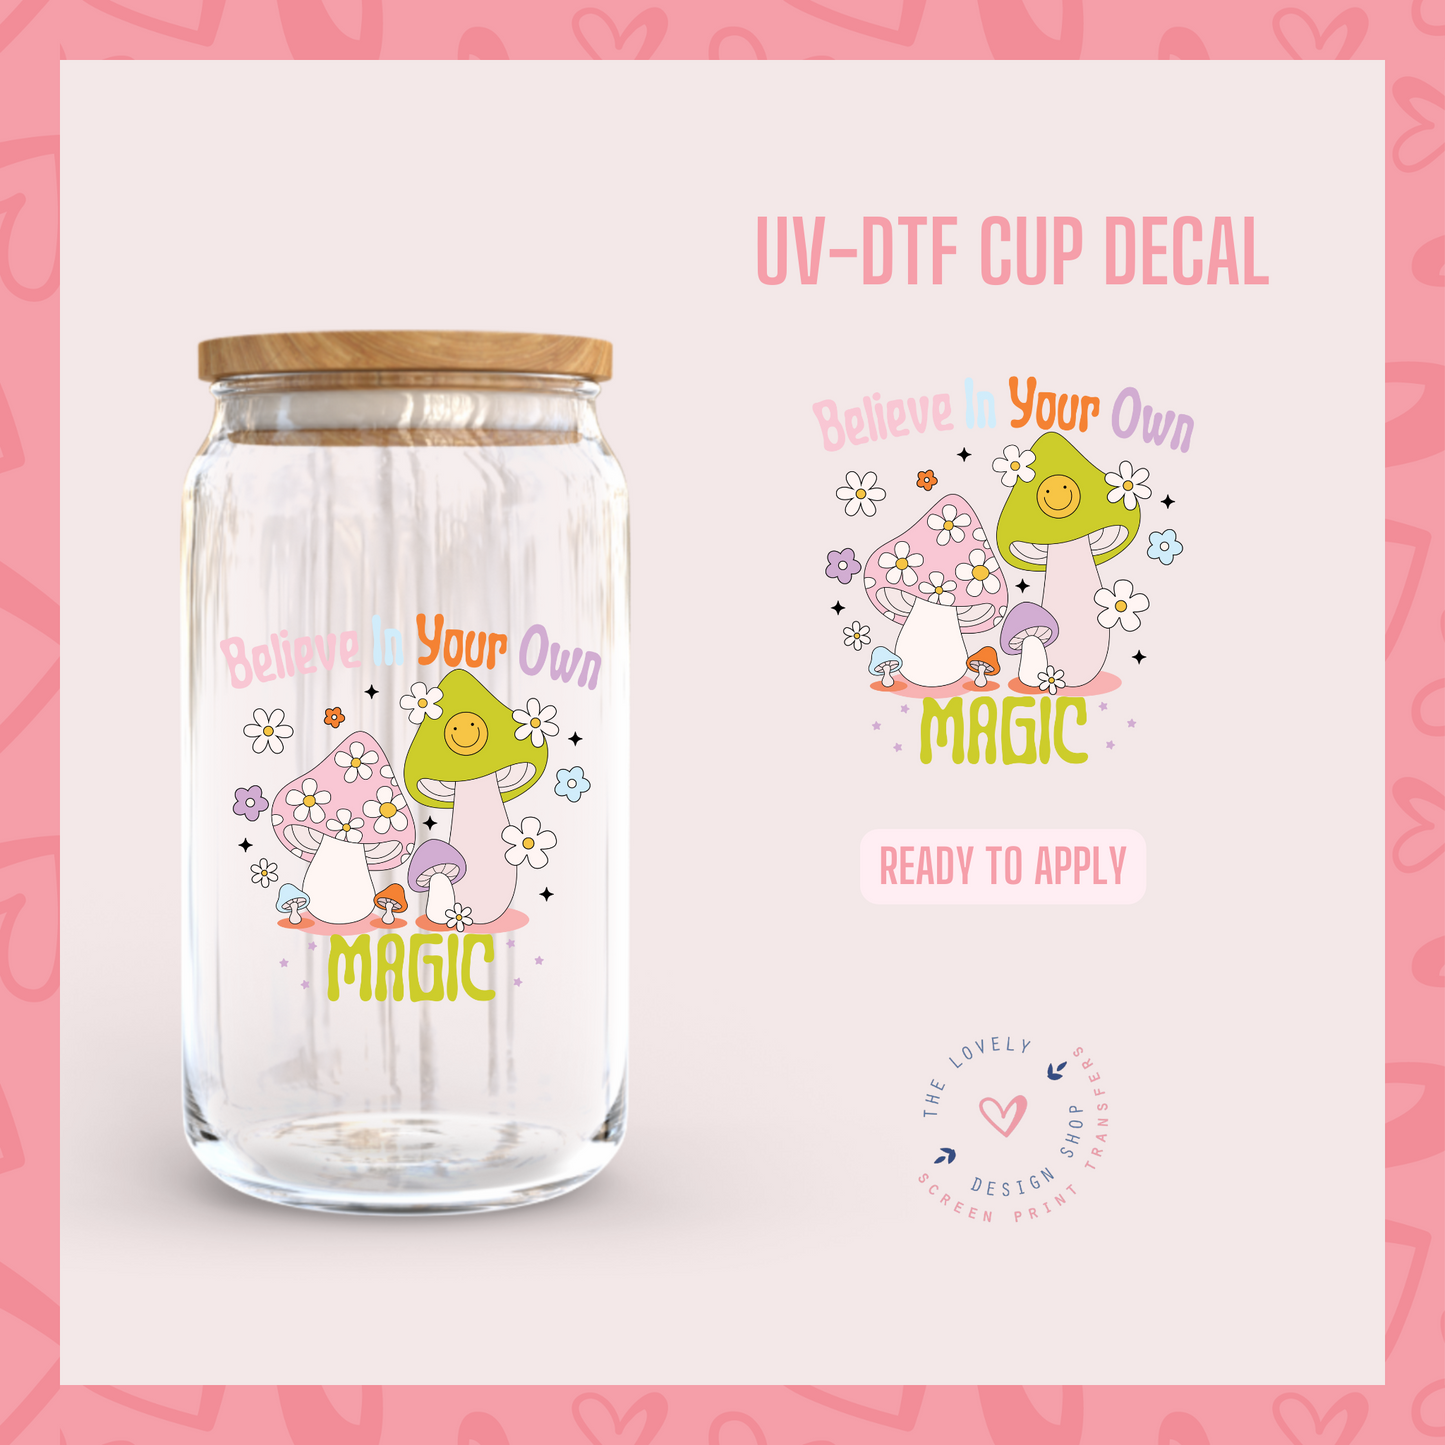 Believe In Your Own Magic - UV DTF Cup Decal (Ready to Ship) Mar 19